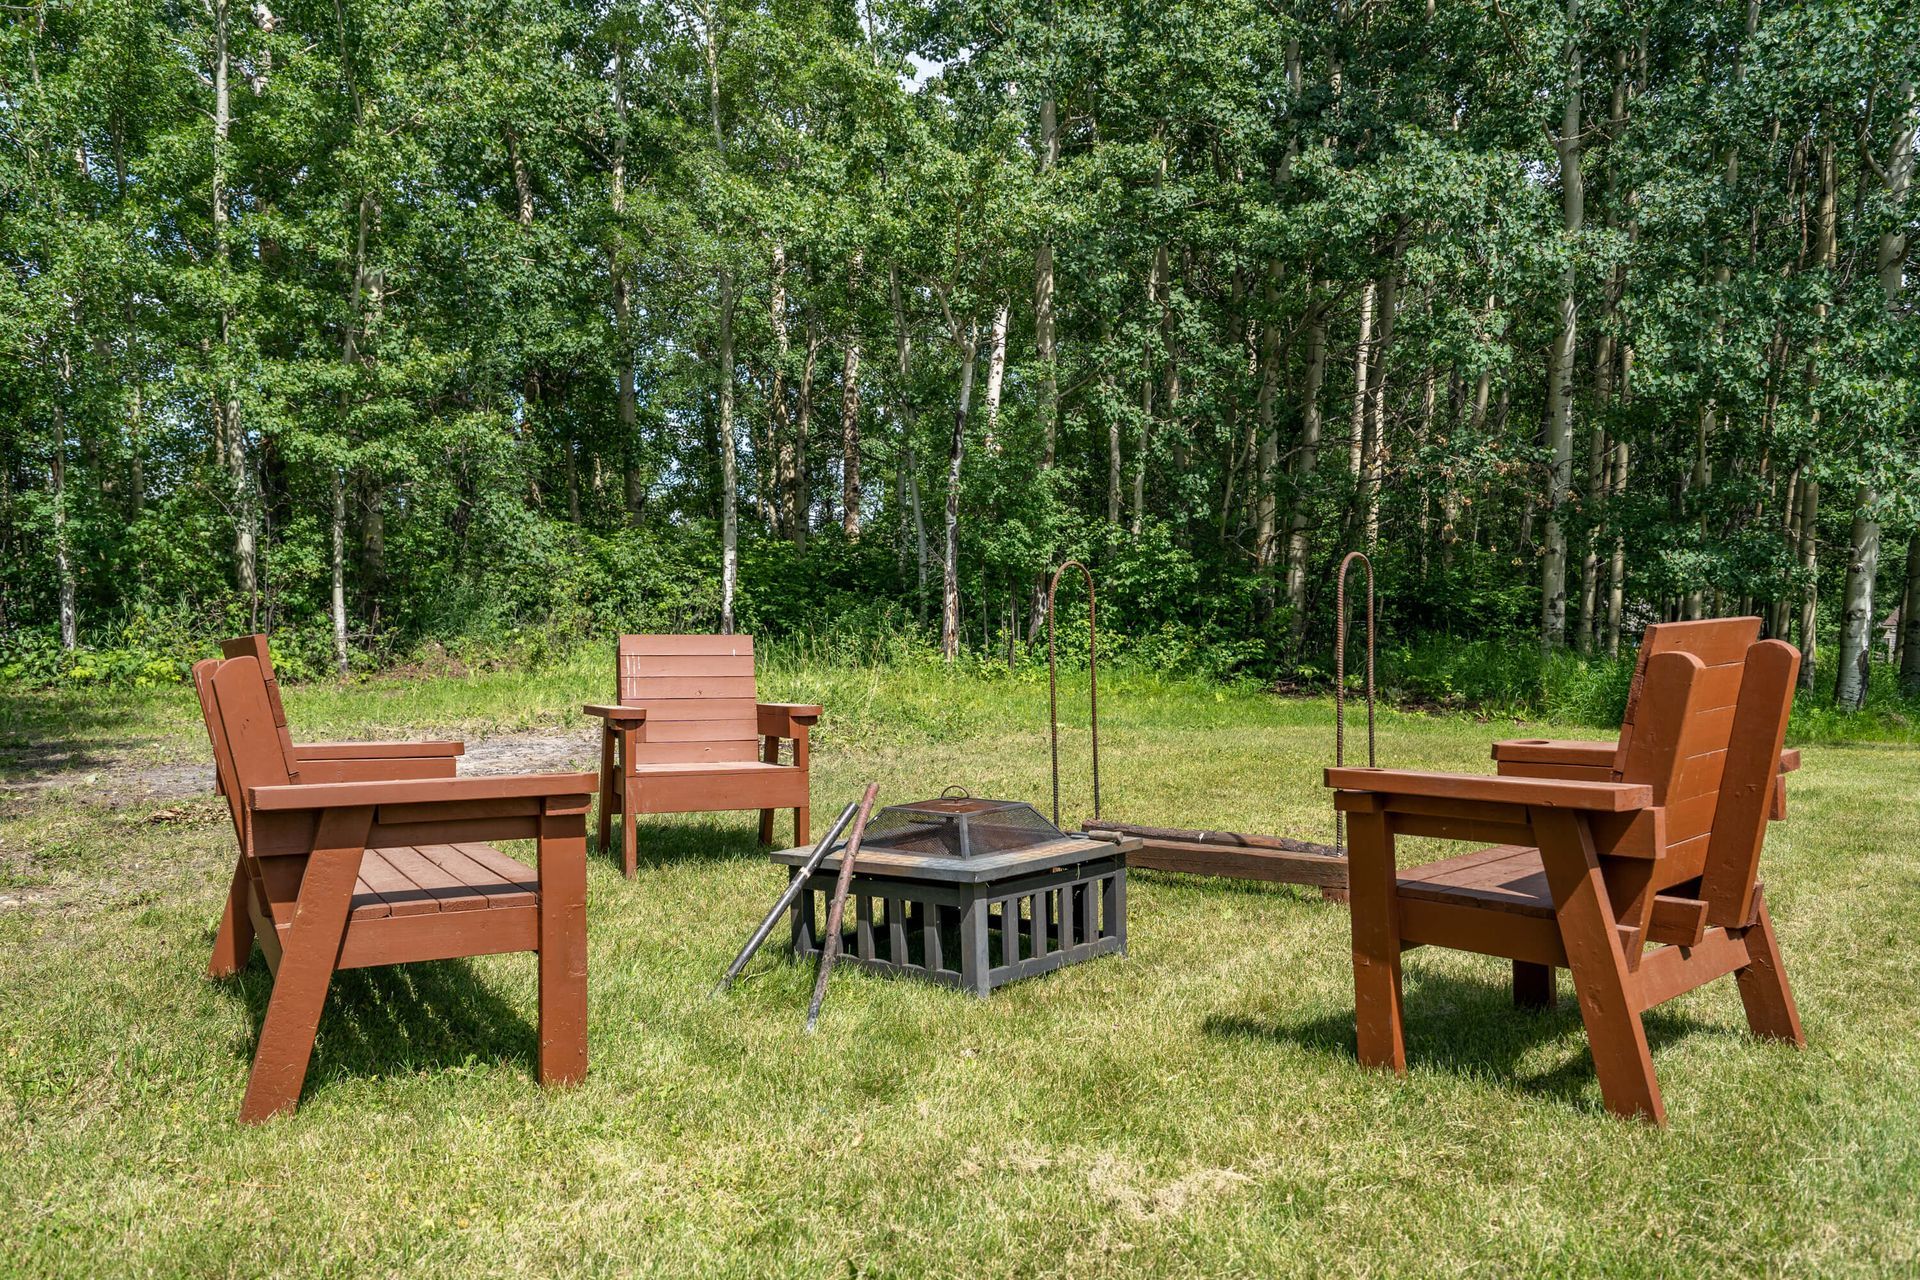 Private fire pit of Hilltop Hideaway, a Rimbey Gull Lake short-term rental hosted by Aisling Baile Property Management.